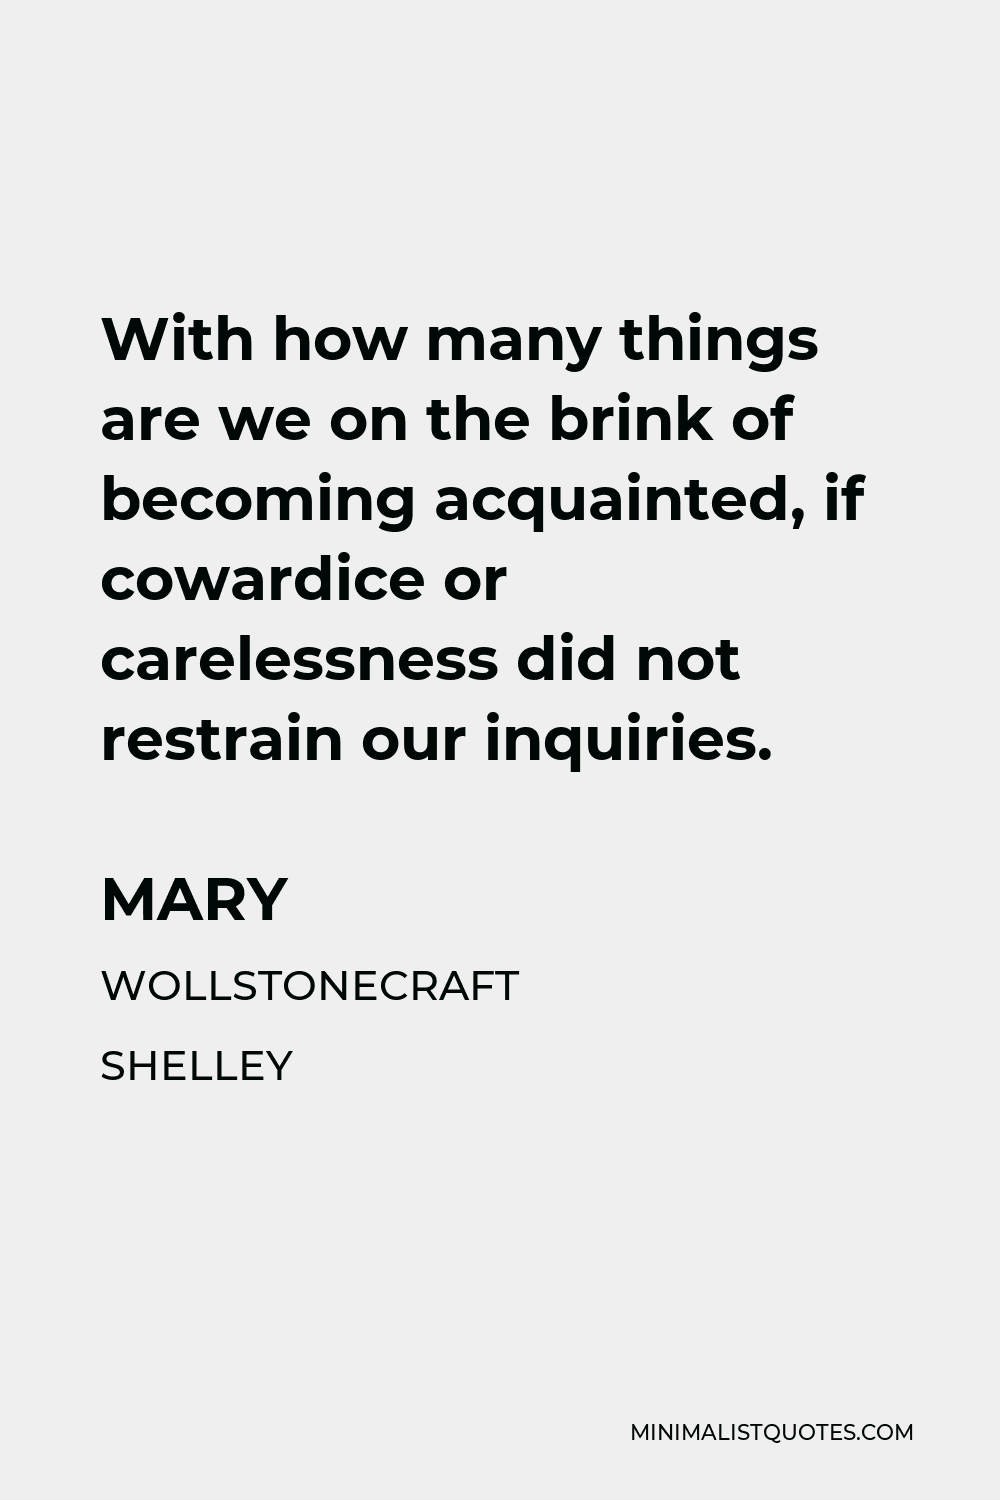 Mary Wollstonecraft Shelley Quote - With how many things are we on the brink of becoming acquainted, if cowardice or carelessness did not restrain our inquiries.